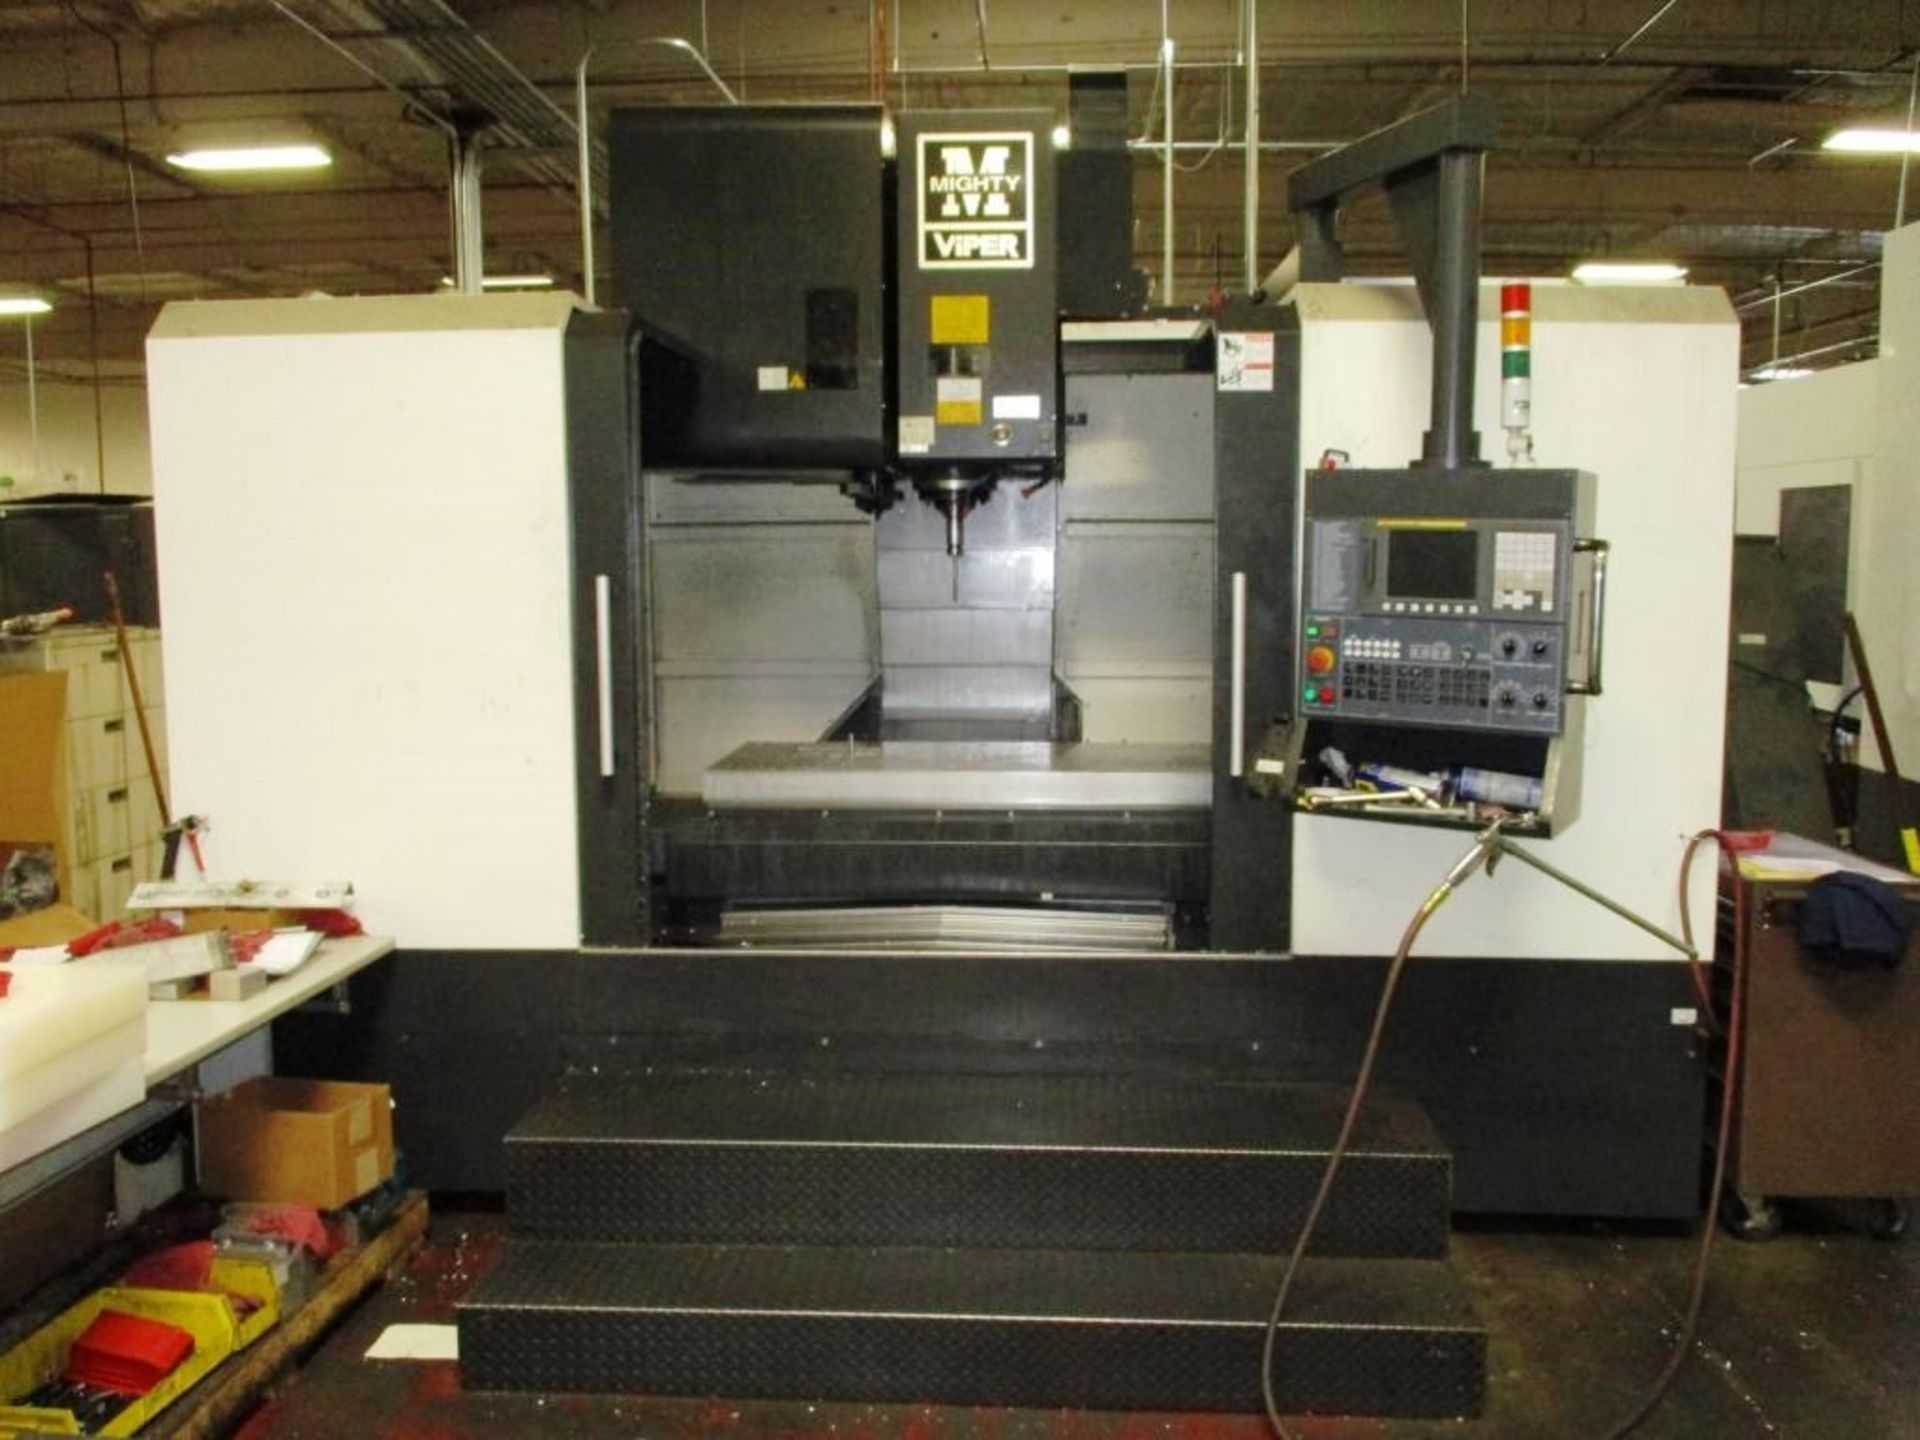 Mighty Viper VMC-137 CNC Vertical Machining Center, Fanuc 0iMD Control, New 2014 - Image 2 of 9